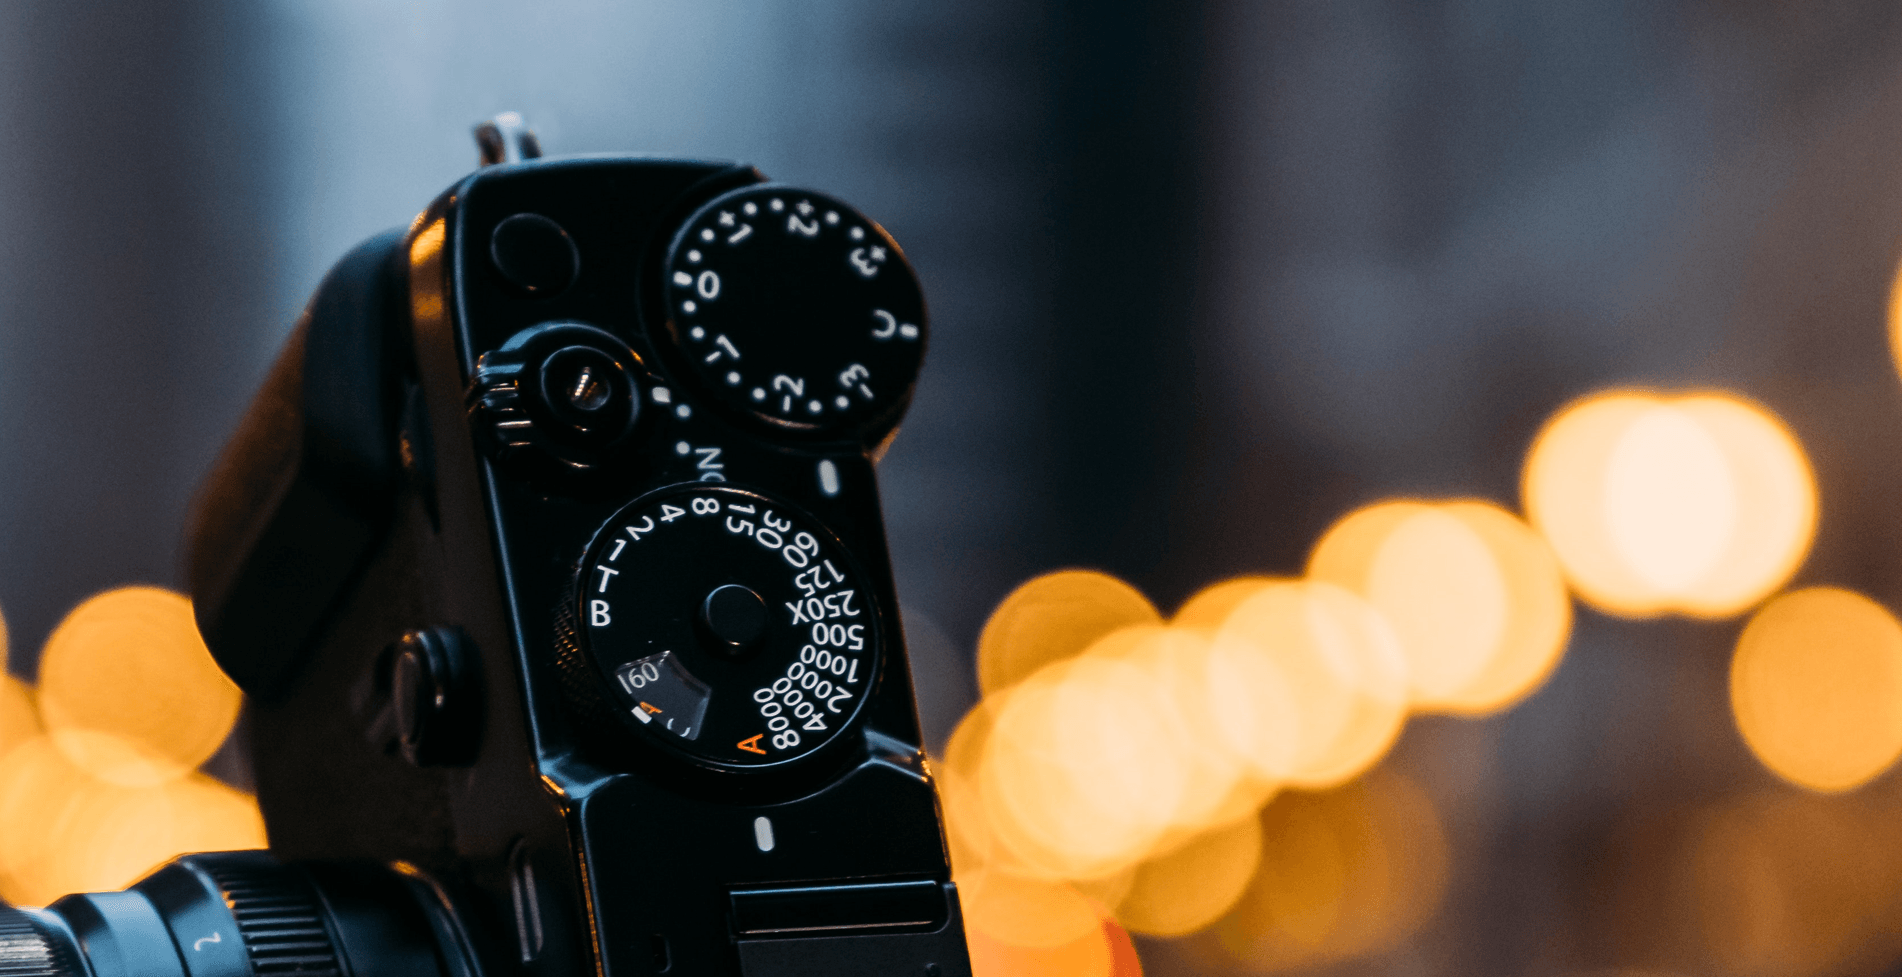 How to use your camera's bulb mode?